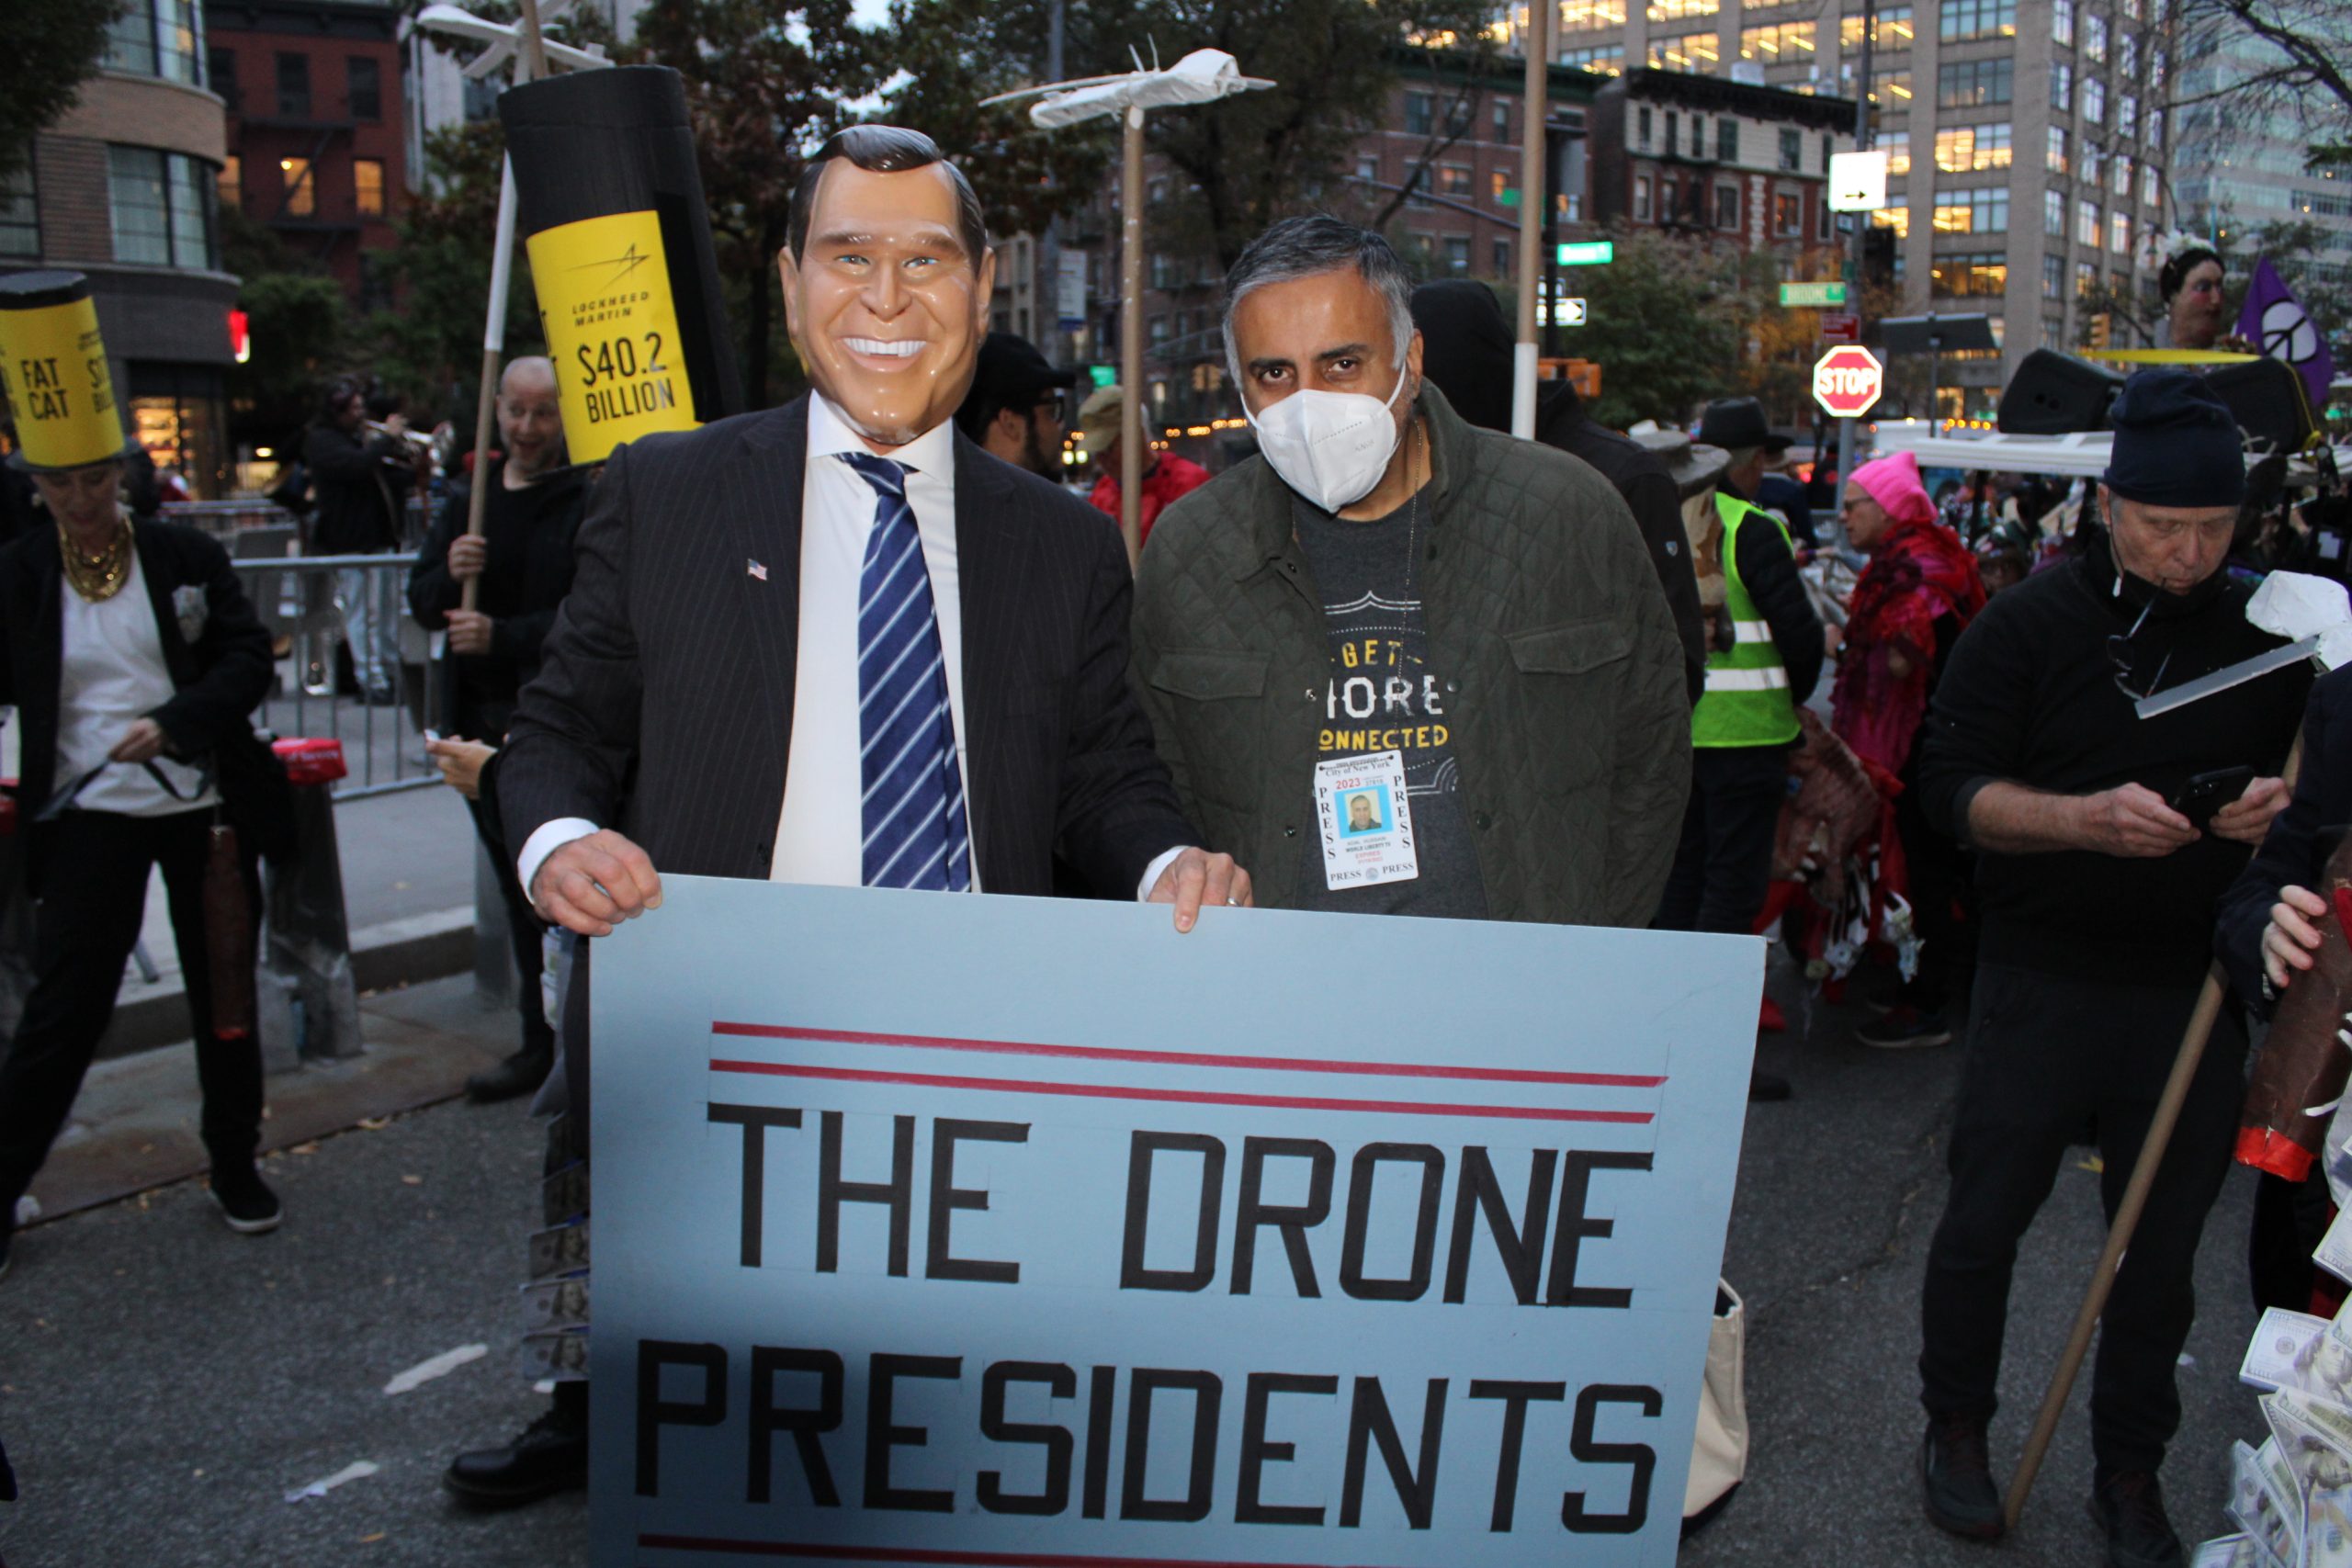 Dr Abbey with Drone Presidents